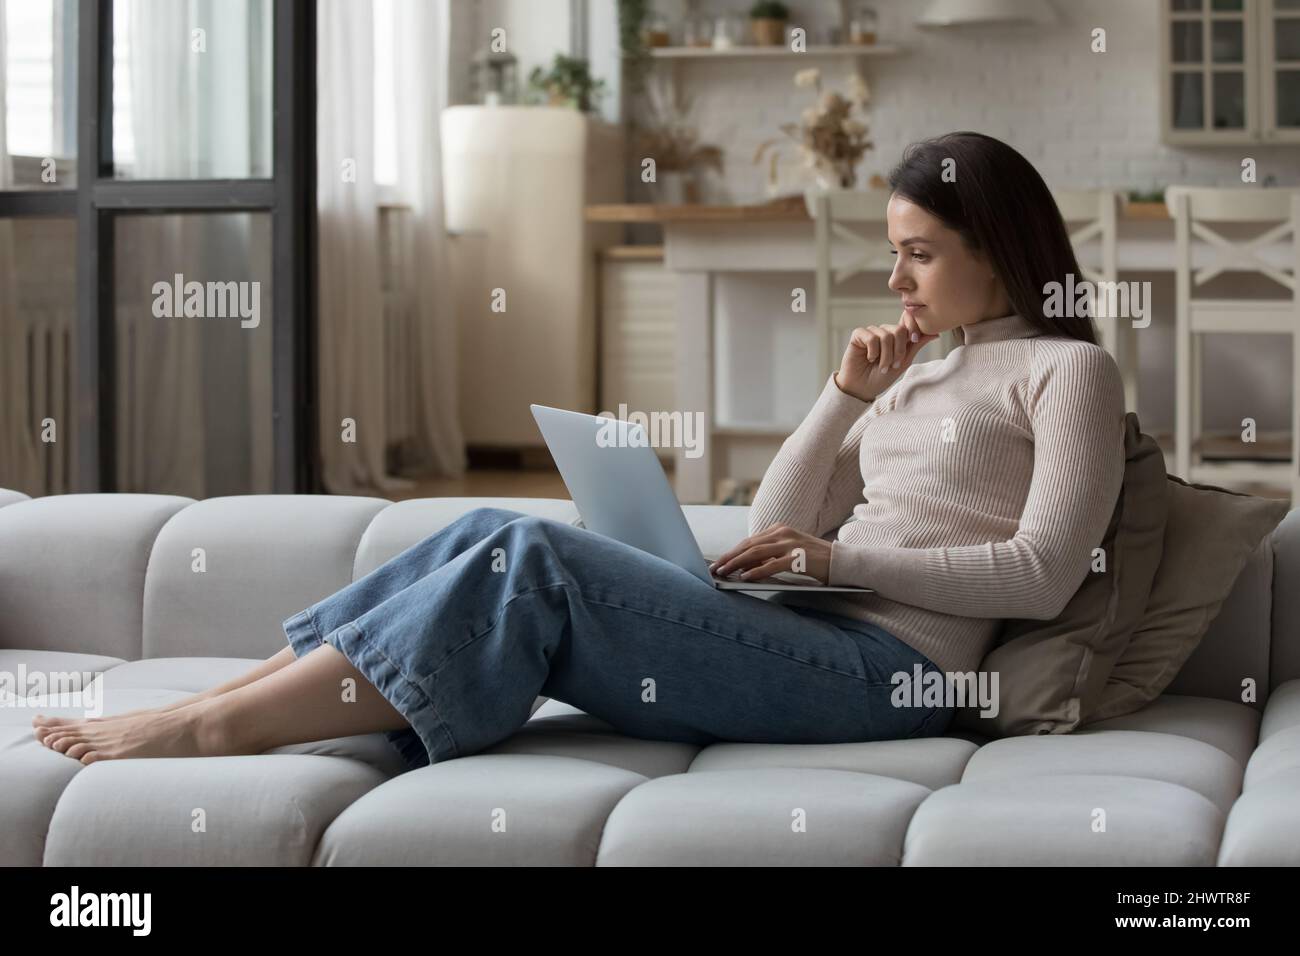 Pensive young woman staring at laptop, feels concerned, looking thoughtful Stock Photo